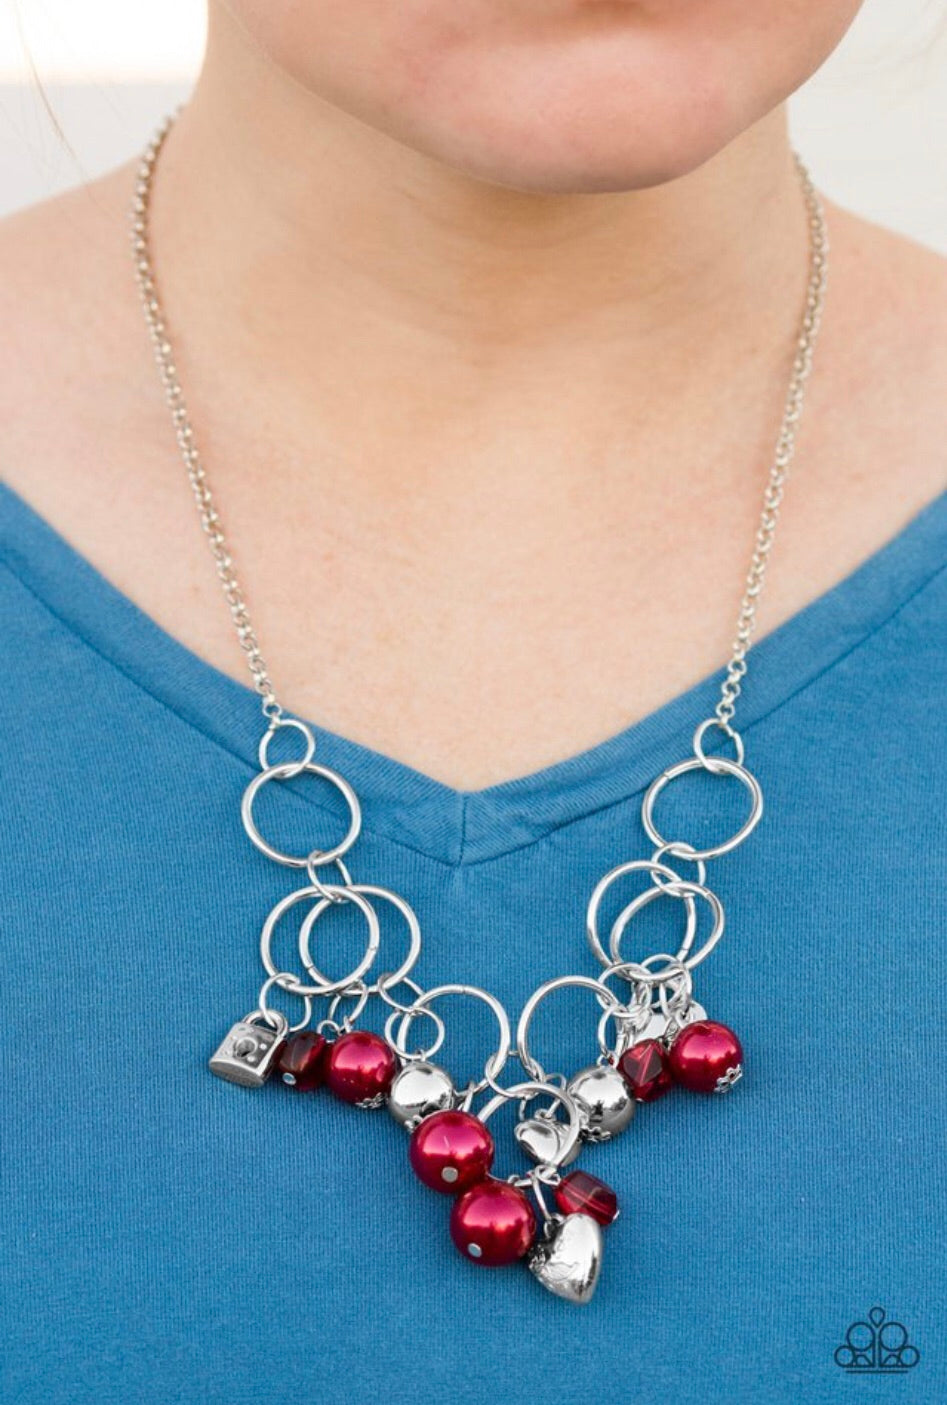 Paparazzi Jewelry Necklace In A Bind - Red